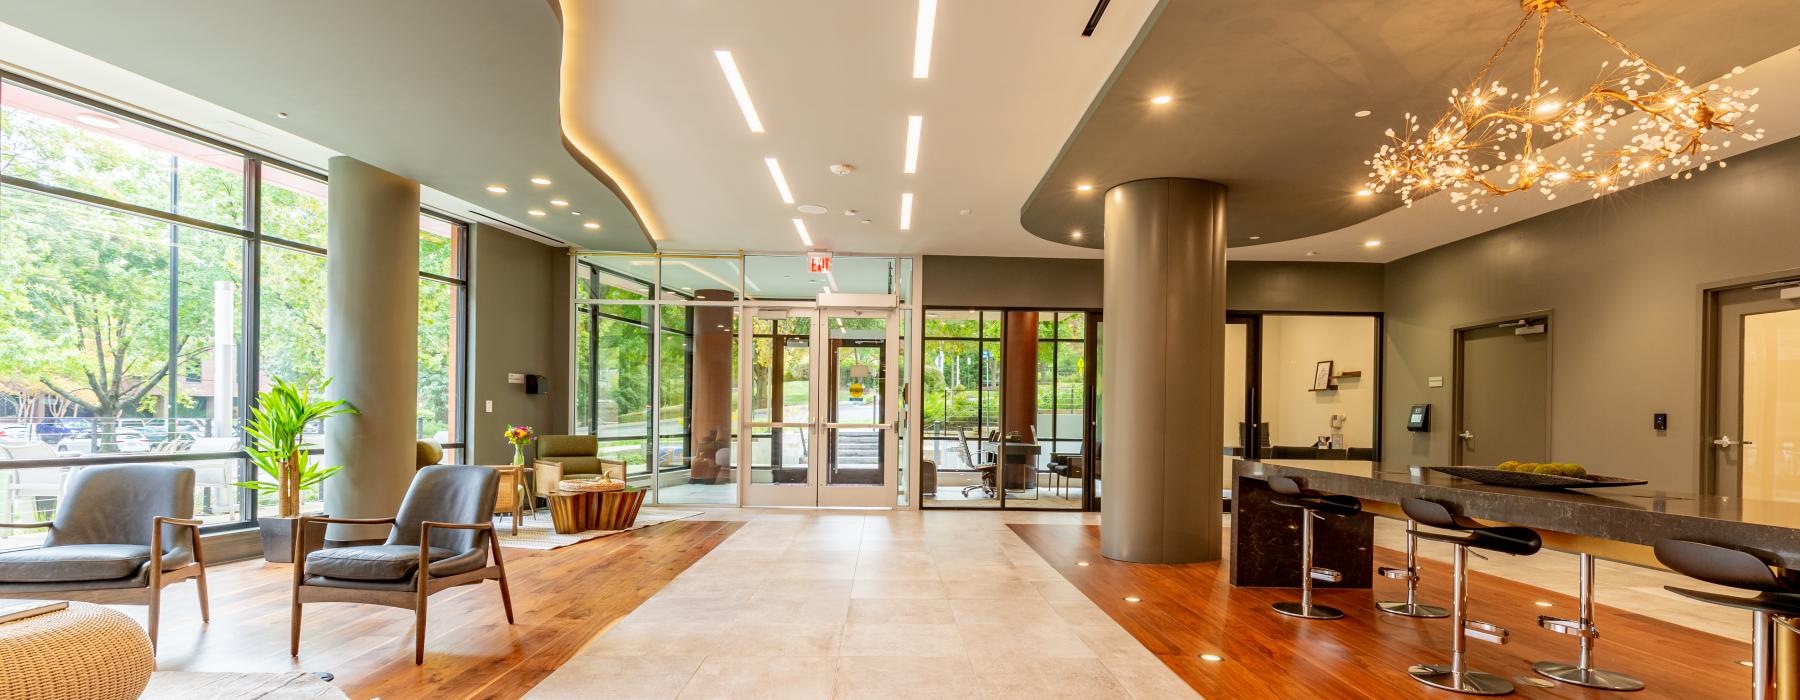 large lobby with seating areas and stylized lighting throughout